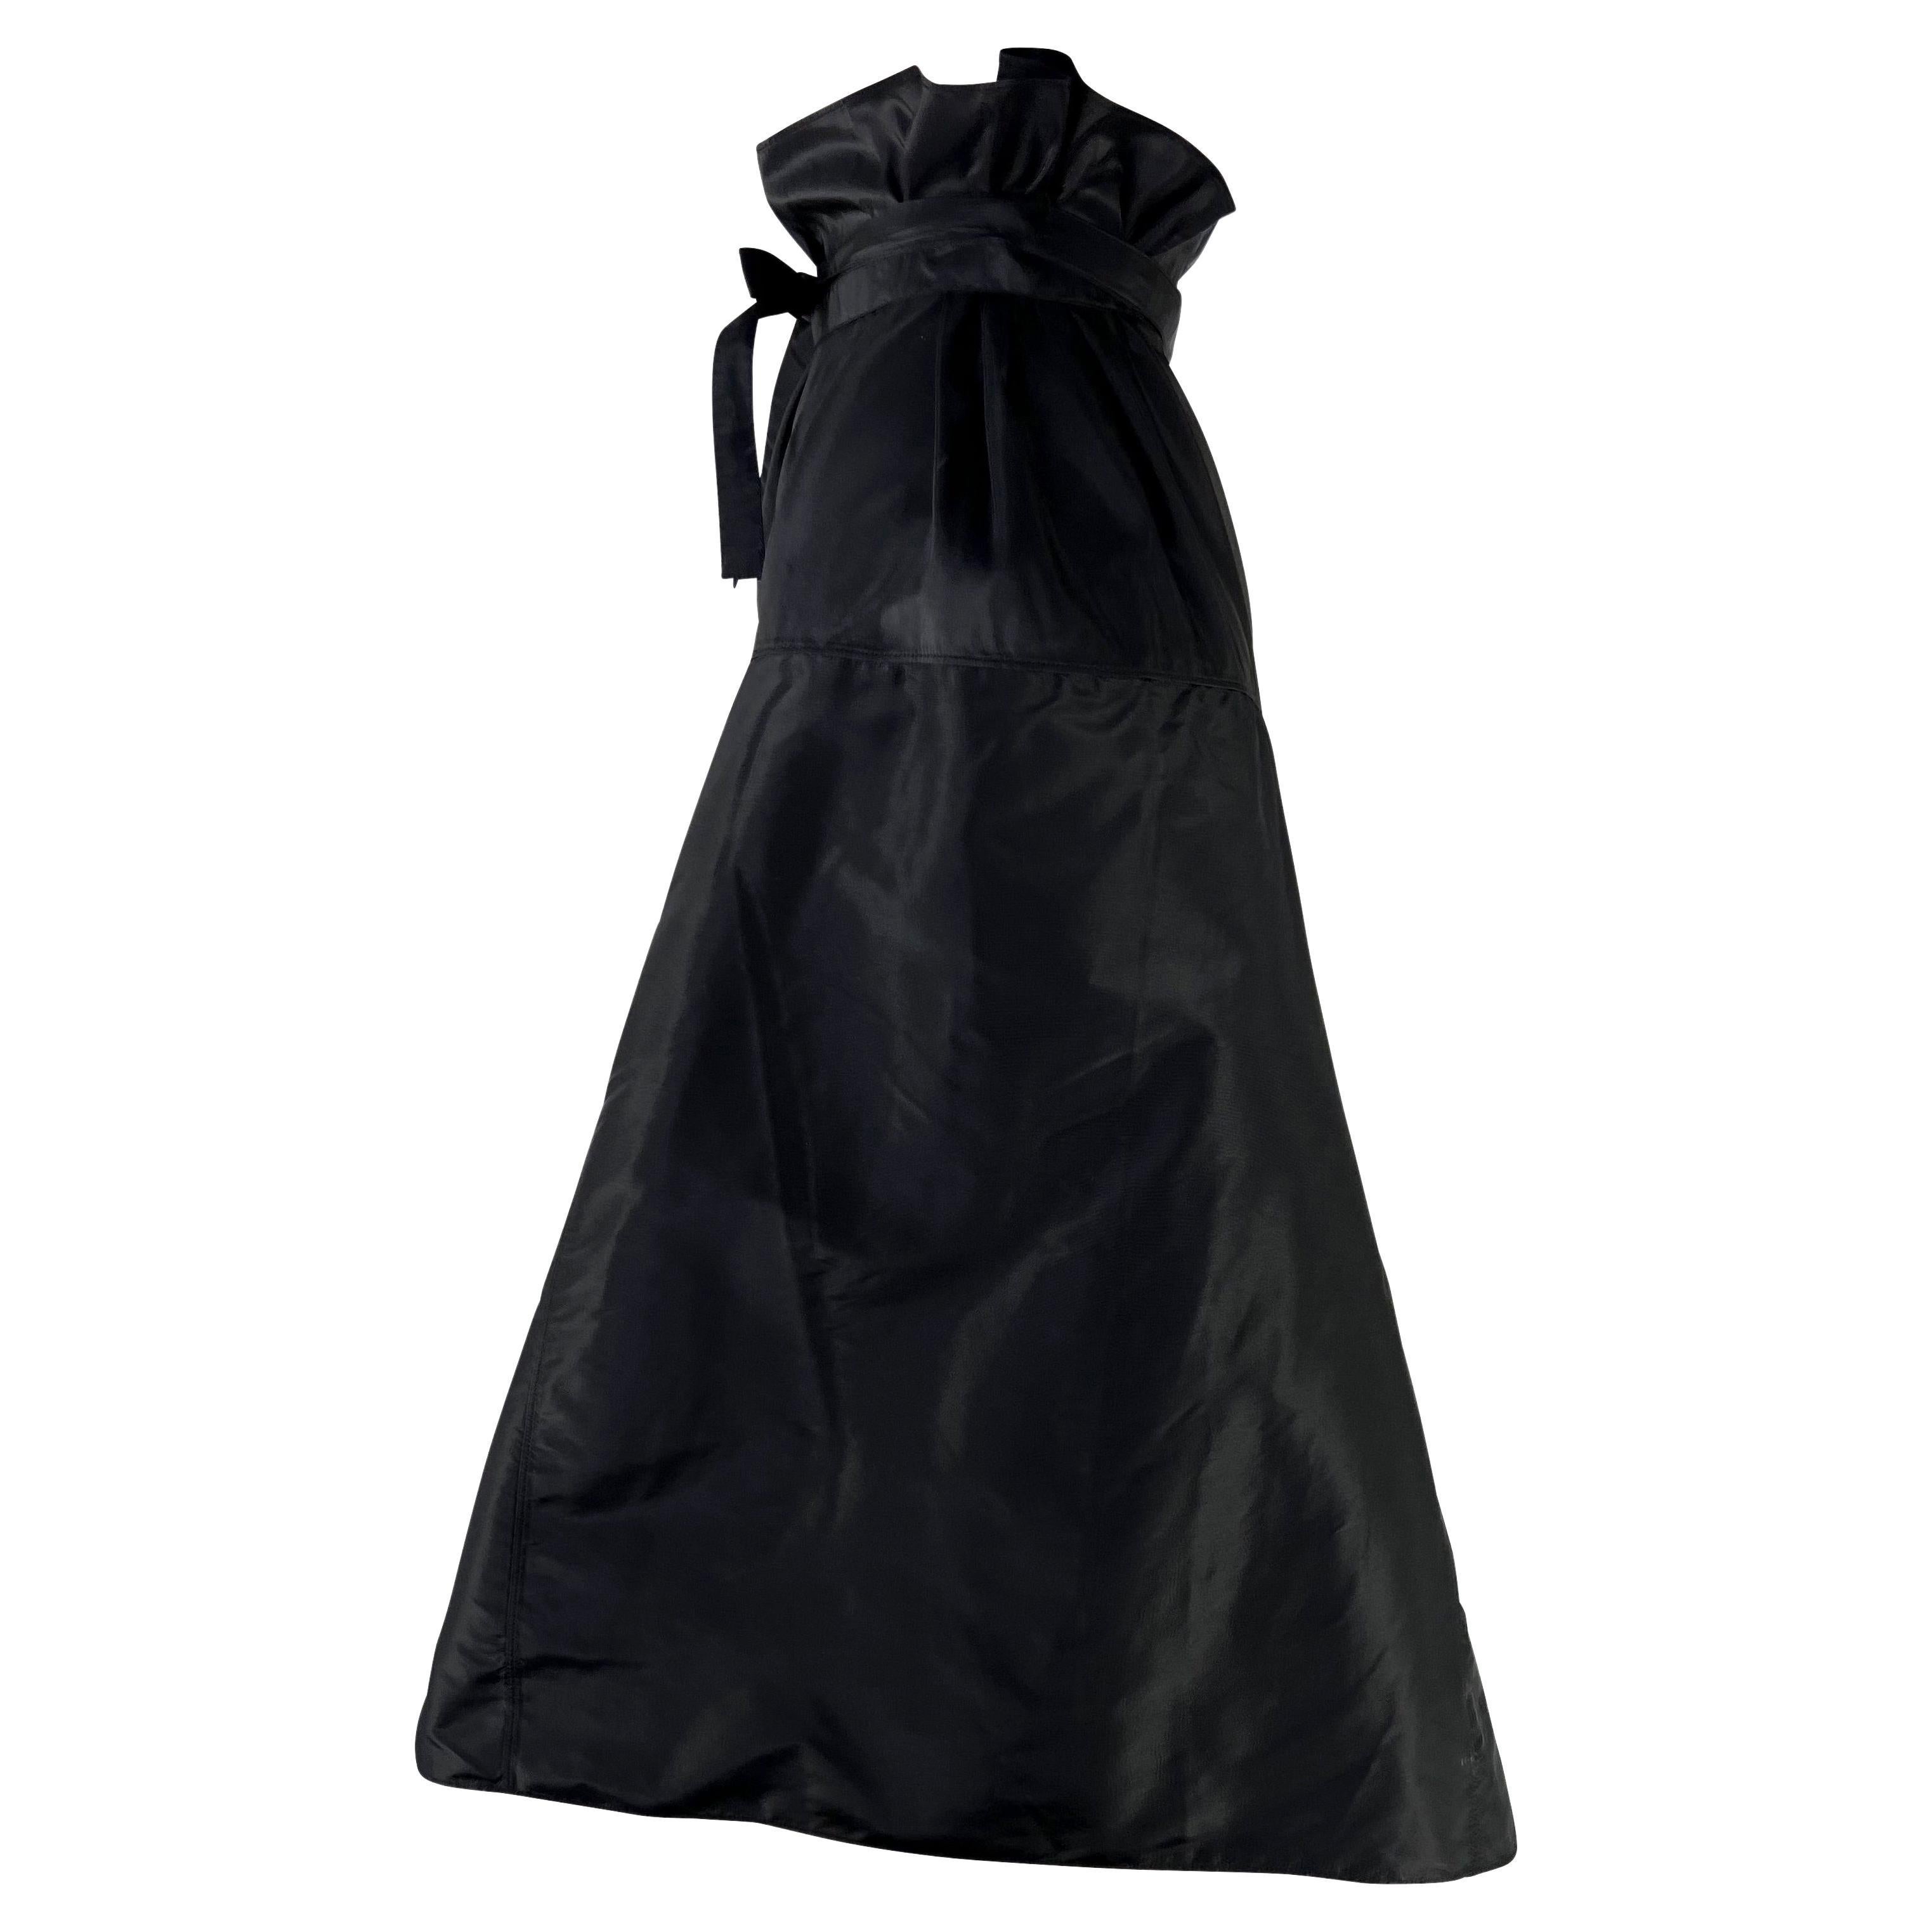 S/S 2002 Gucci by Tom Ford Runway Black Silk Taffeta Belted Wrap Oversized Skirt For Sale 1